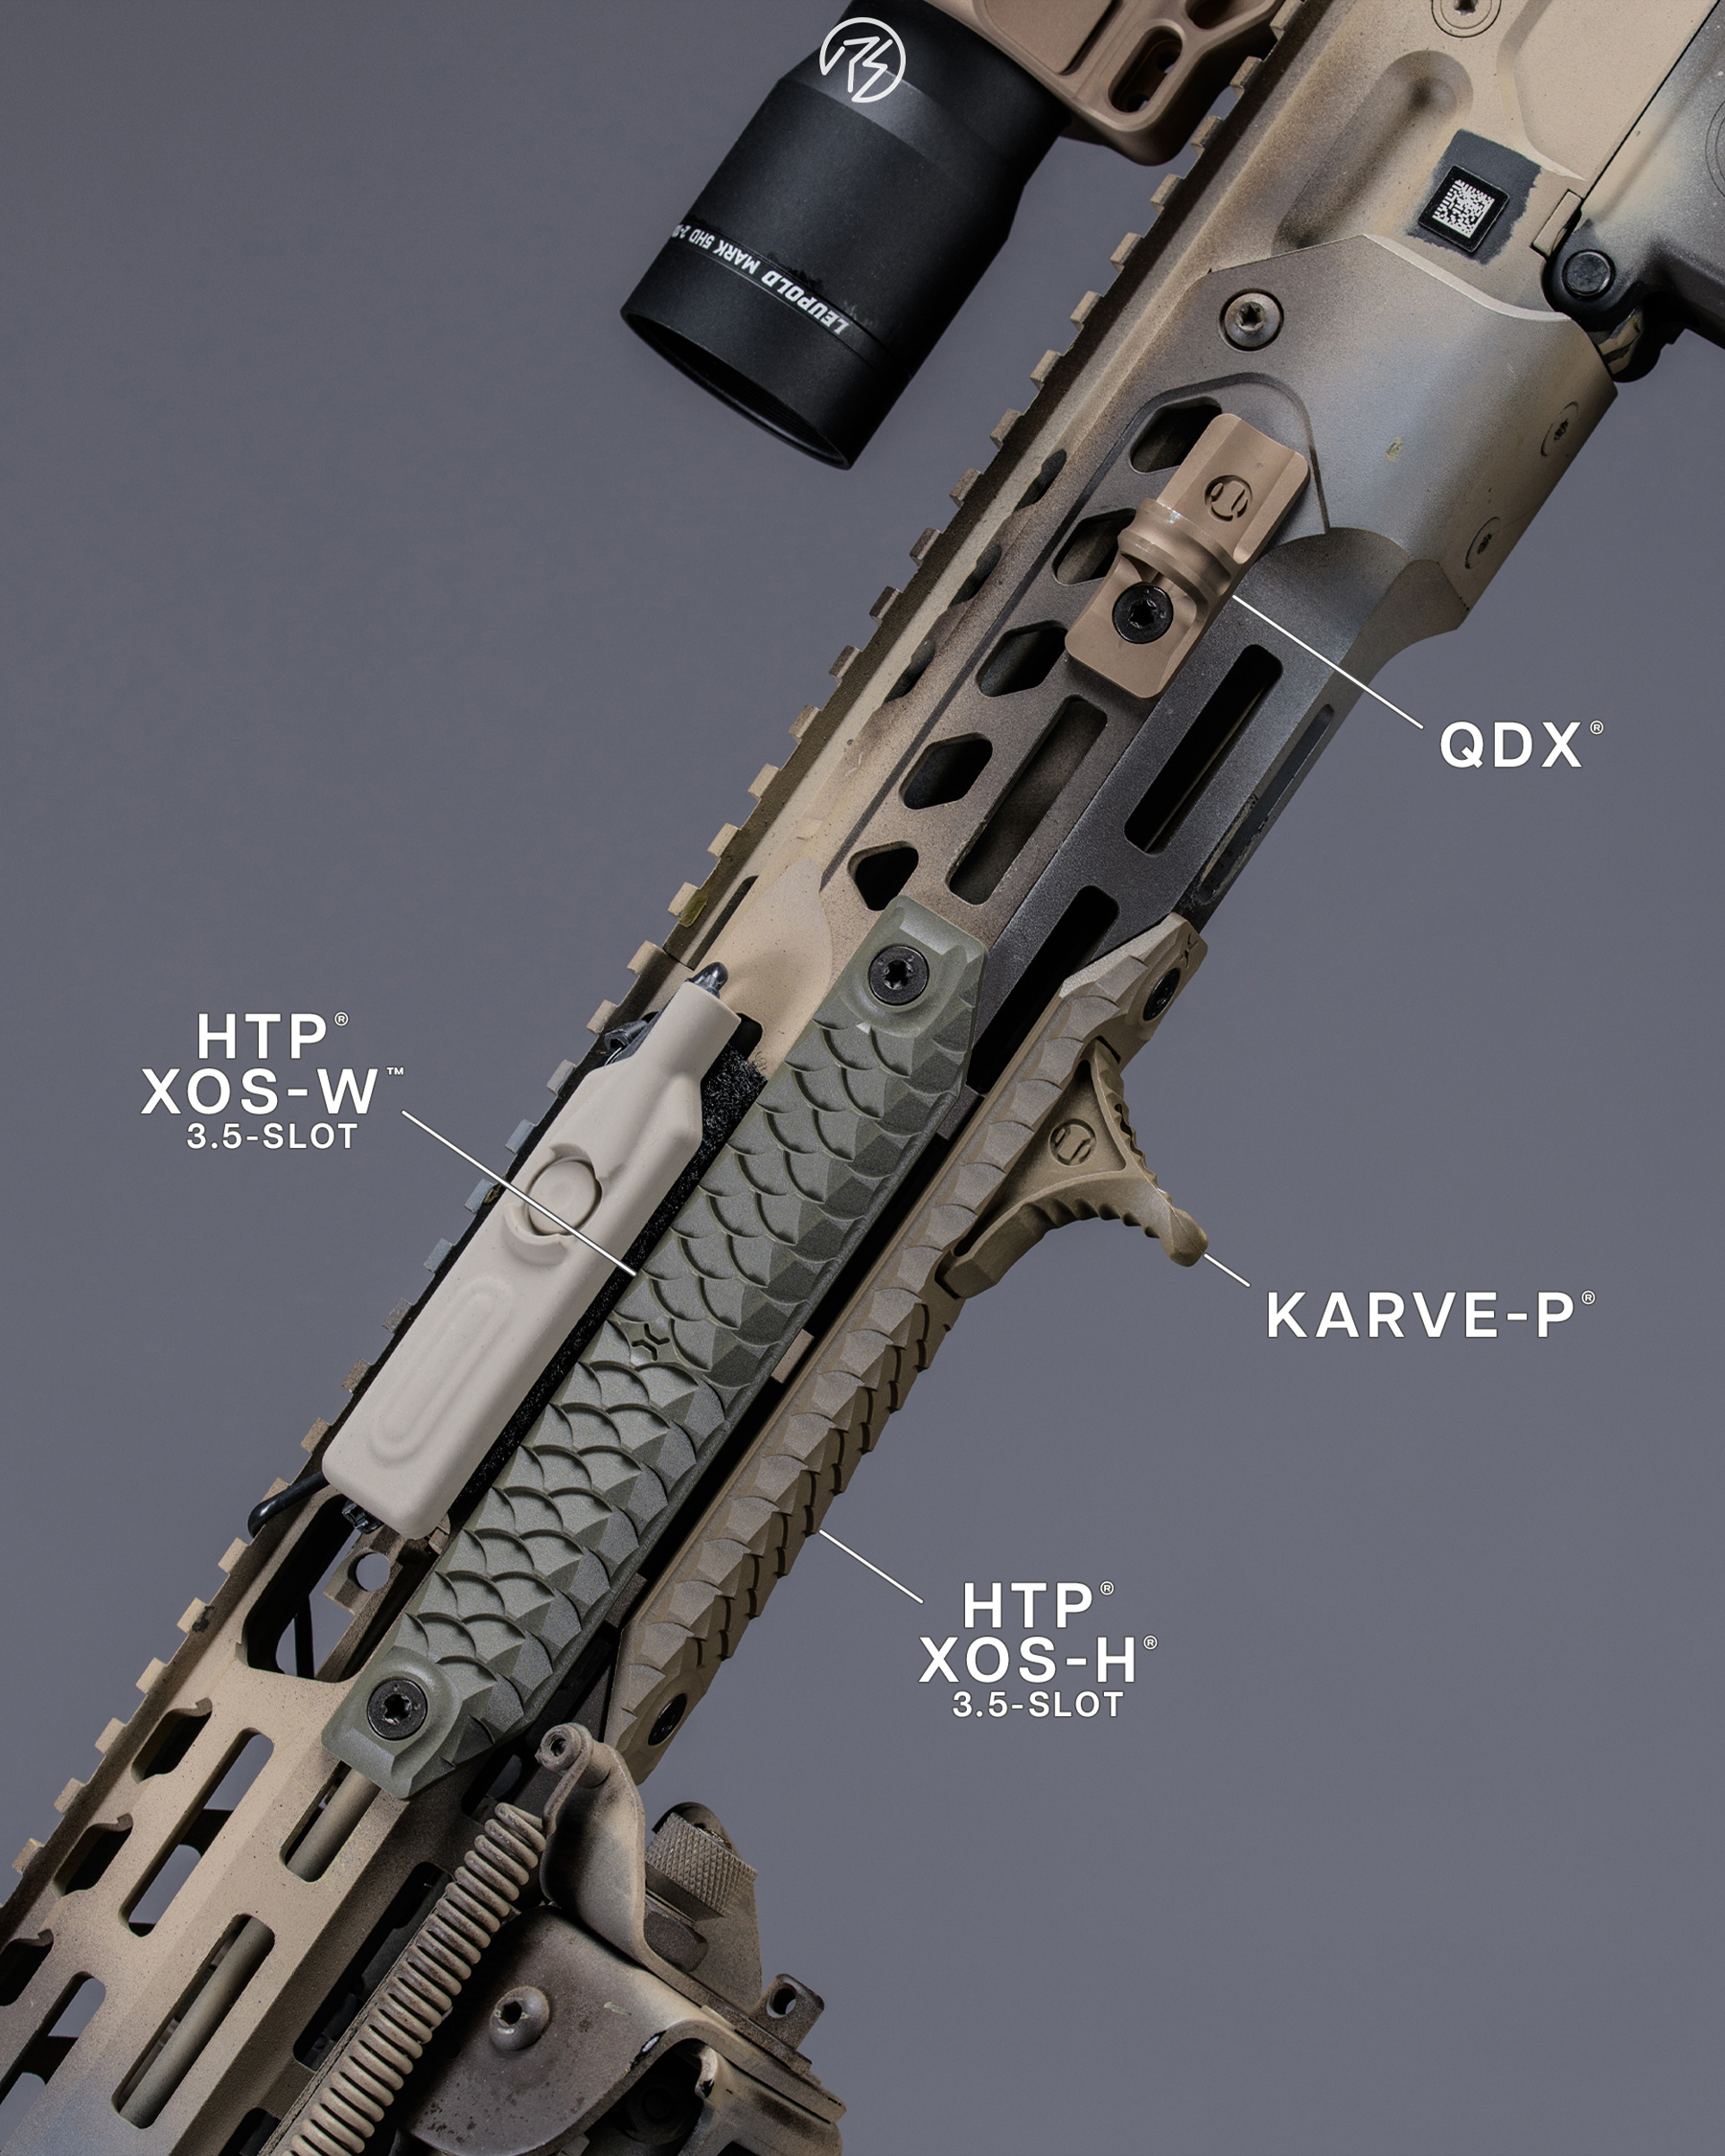 AR-15 parts that are waterproof